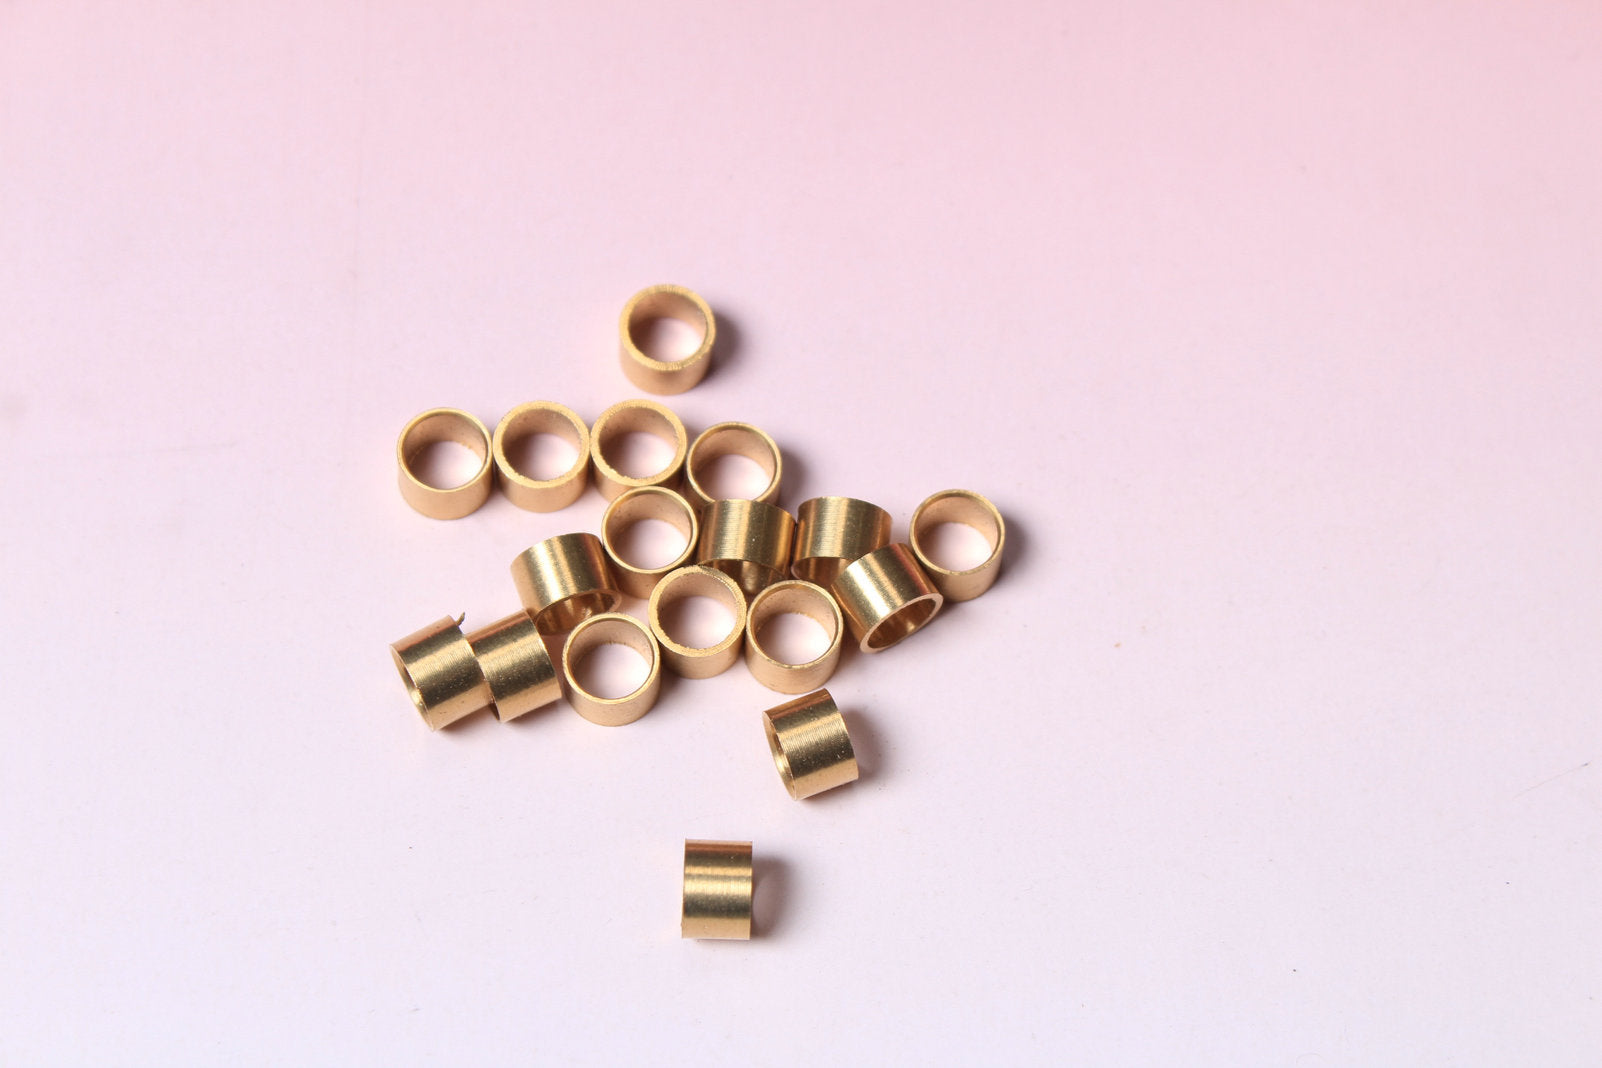 6.2 mm brass ferrules for english 8 ball pool cue ( without thread)